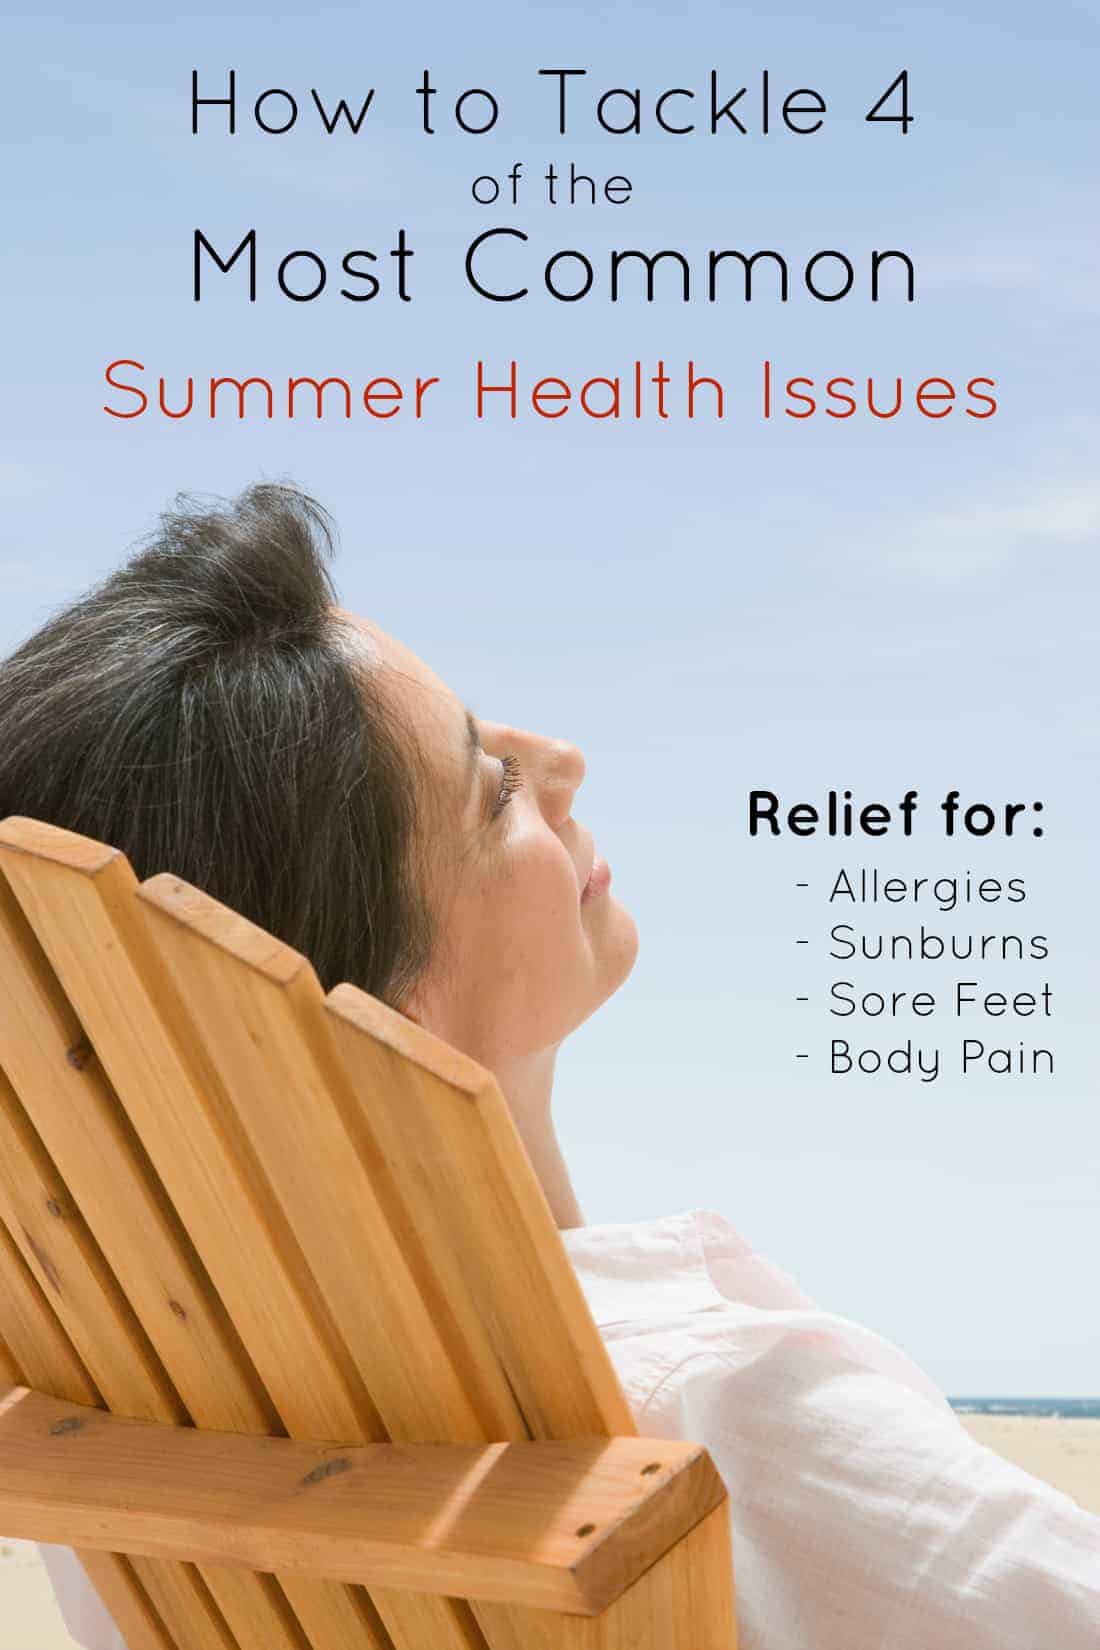 Tackle the 4 Most Common Summer Health Issues